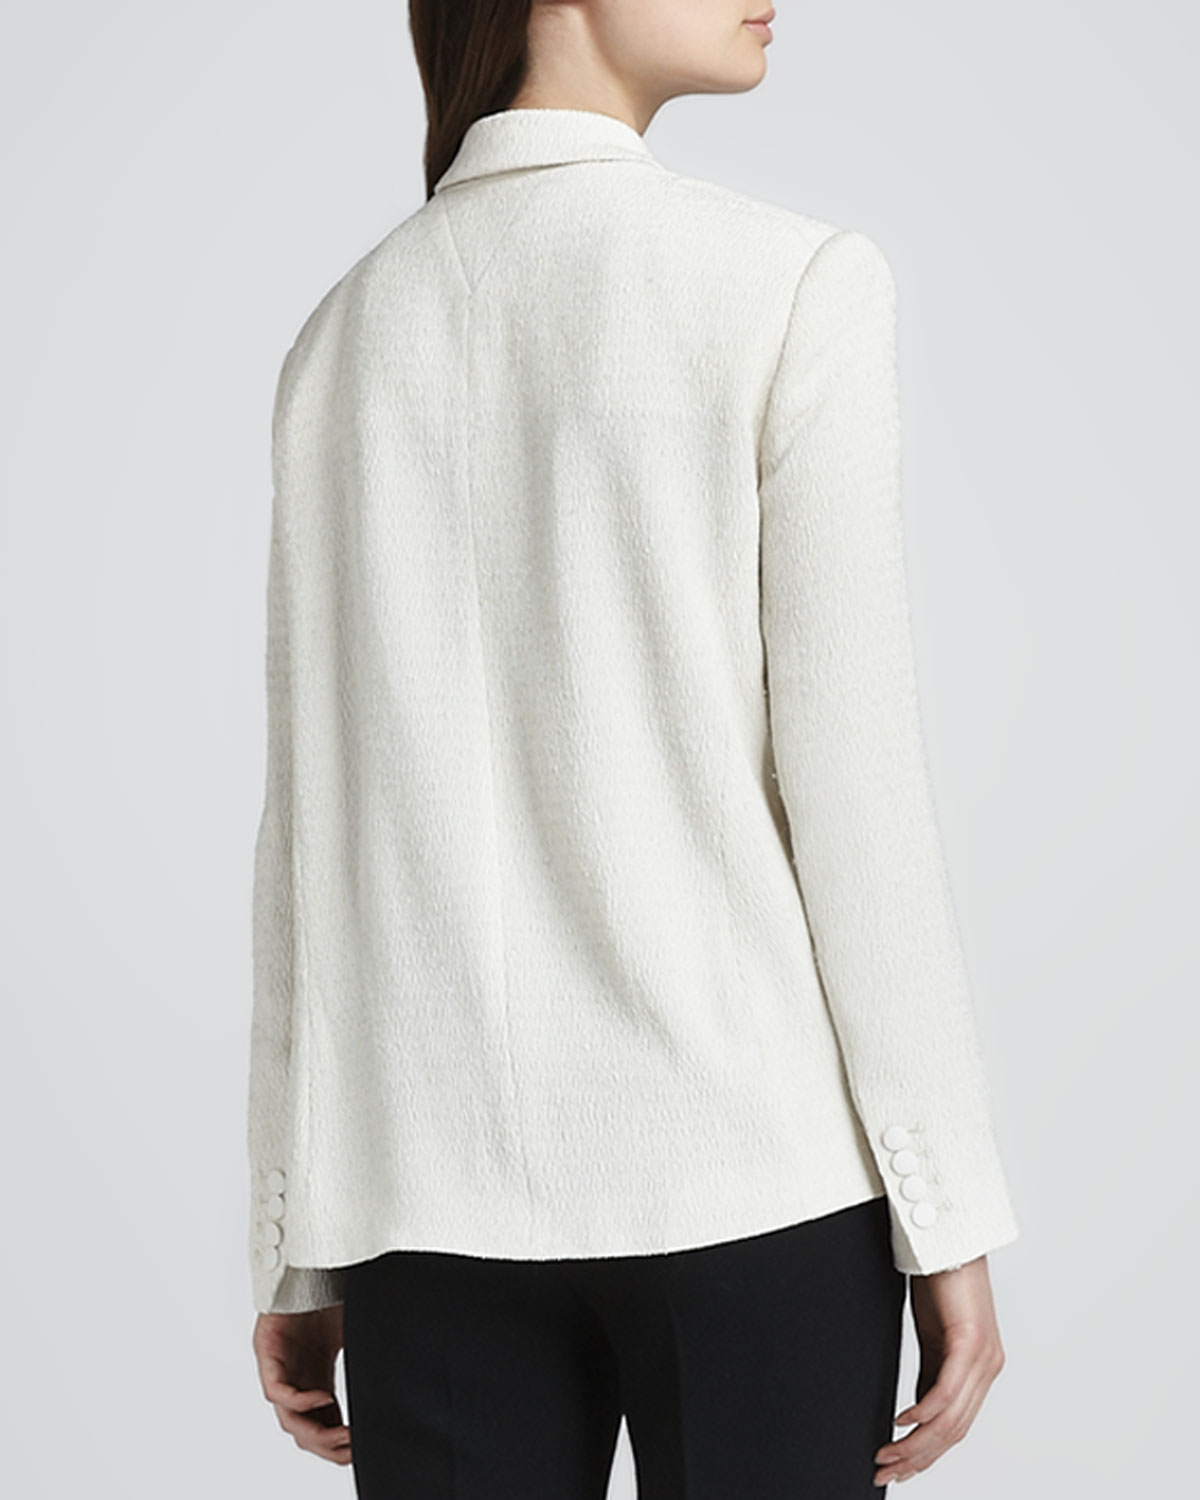 Lyst - Theyskens' Theory Jousse Textured Oversize Jacket in White